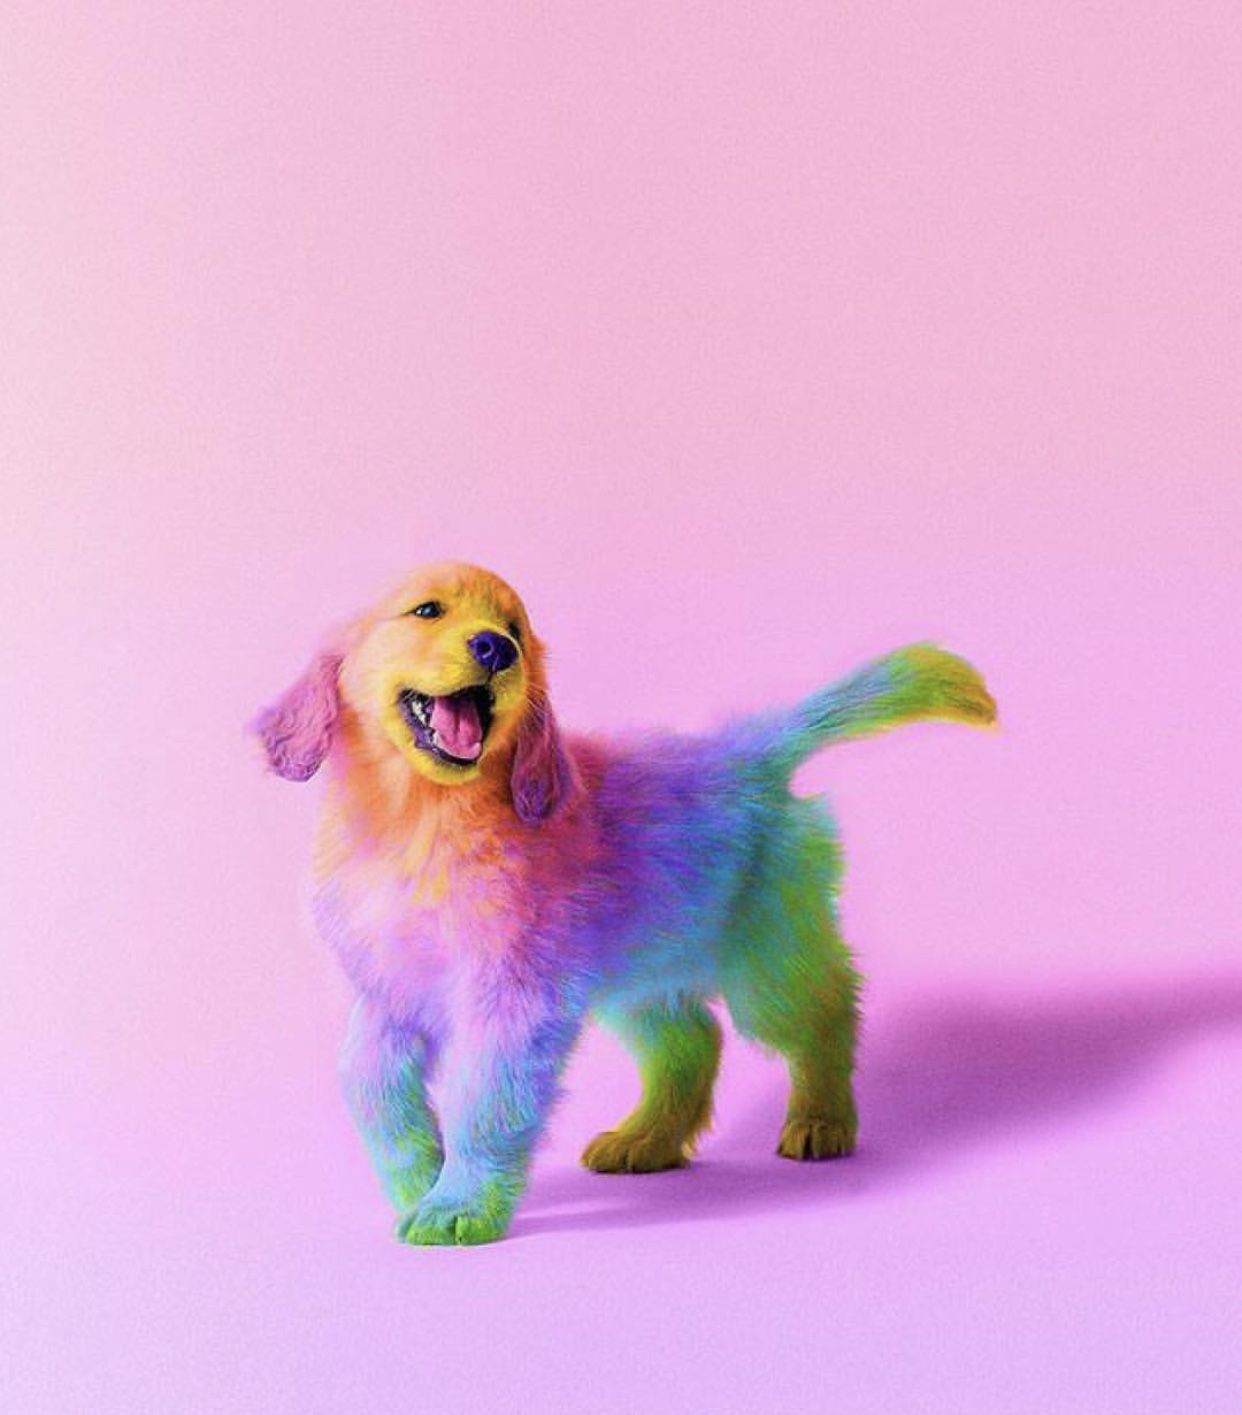 Color Lover. Rainbow dog, Cute animals, Colorful animals